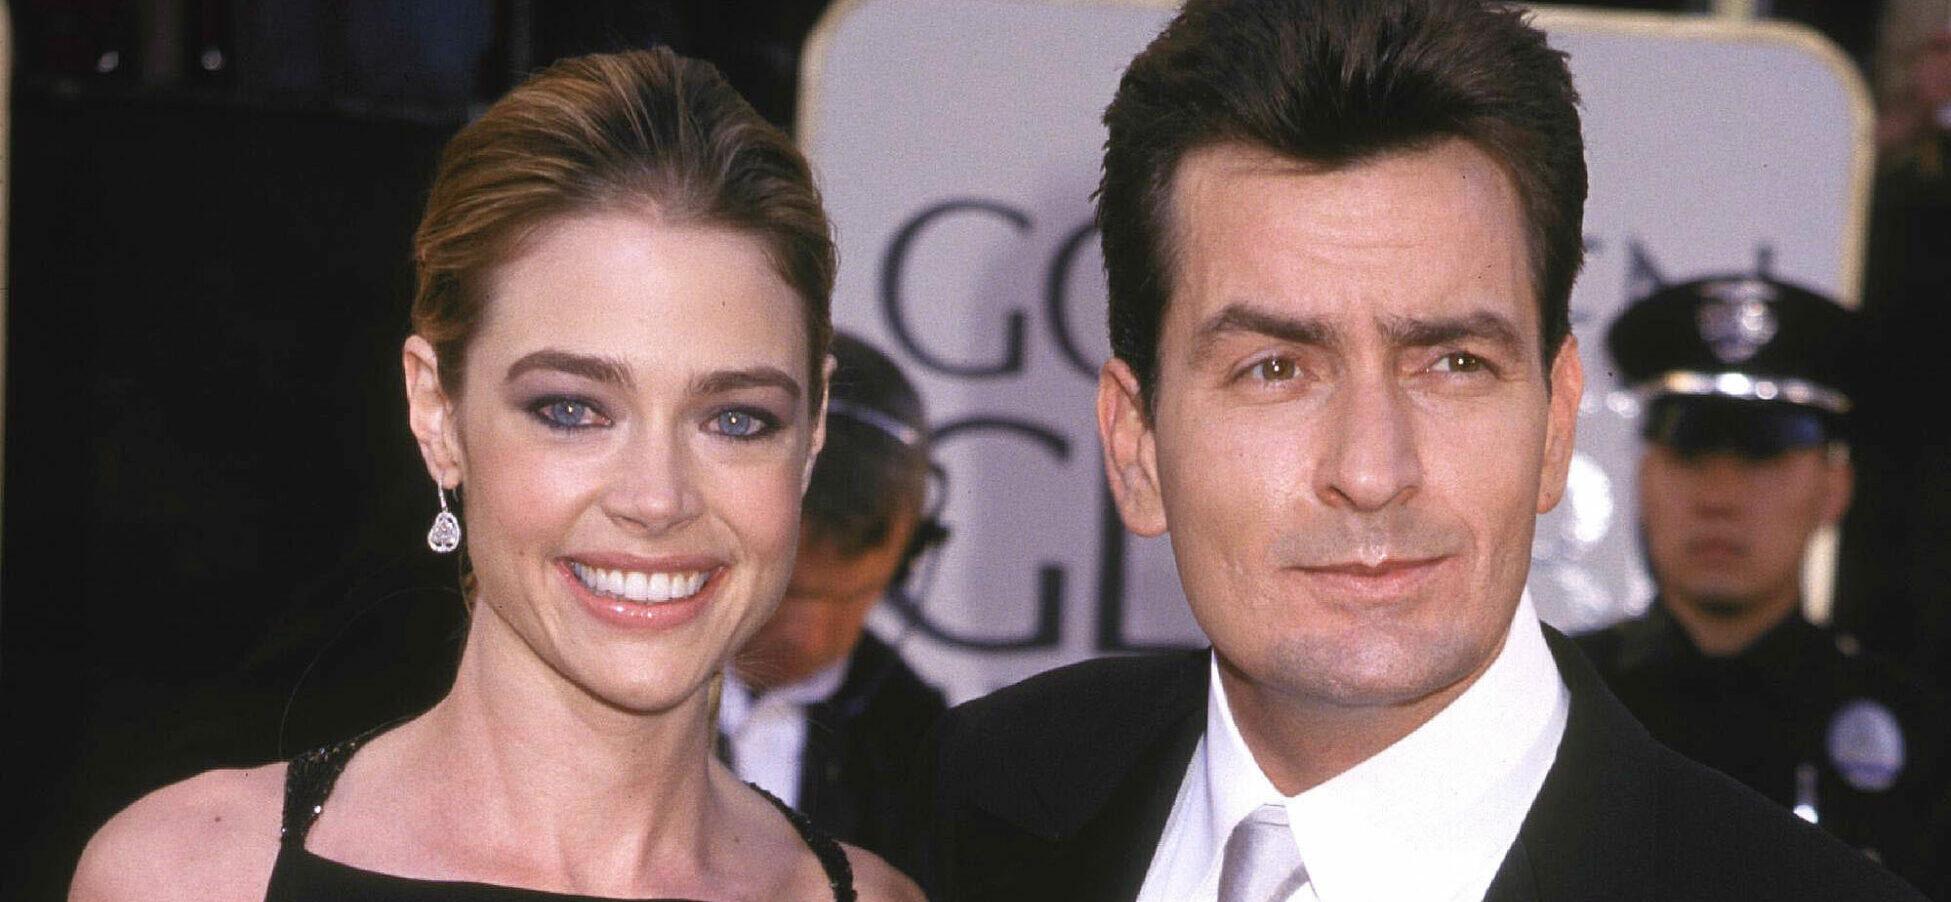 Denise Richards’ Husband Is Very ‘Upset’ By The Charlie Sheen Situation